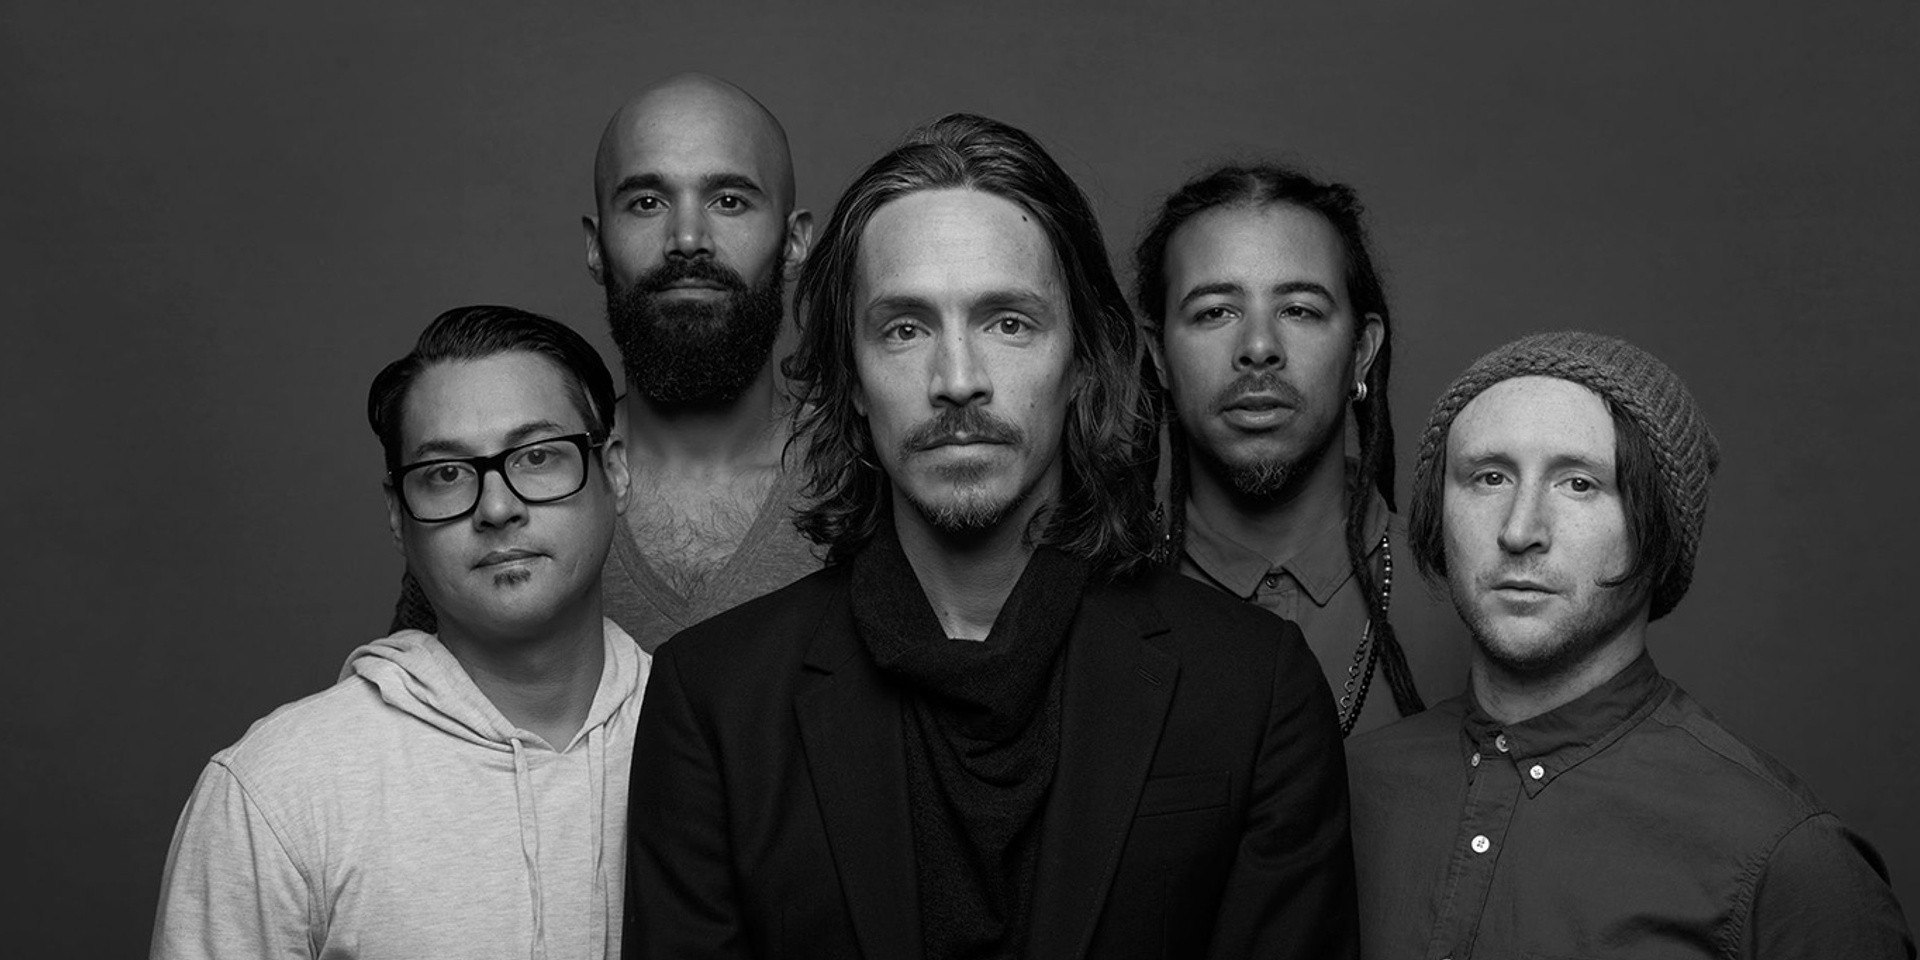 Incubus are returning to Singapore in 2018